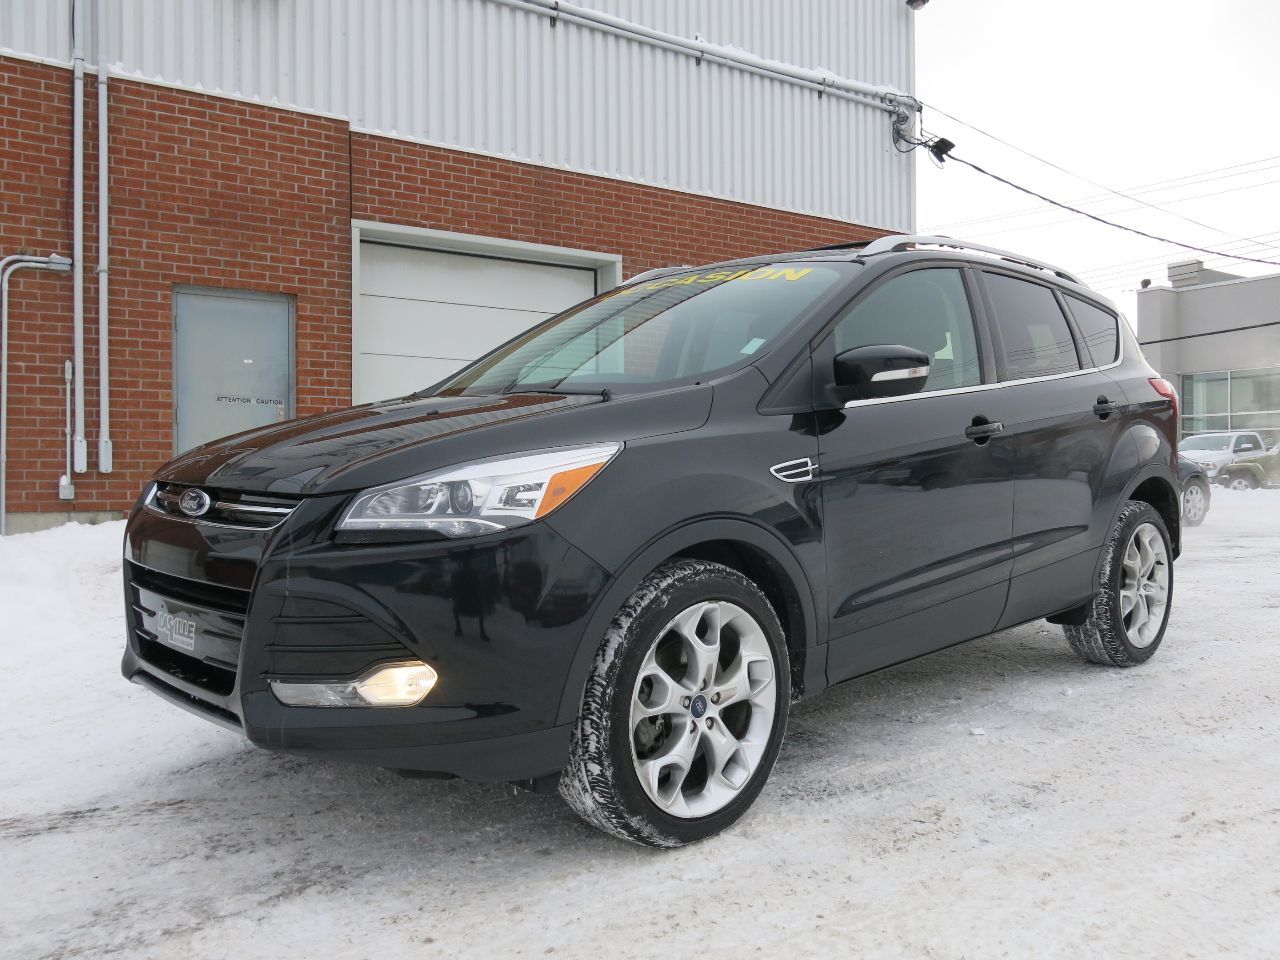 Used ford escape for sale in montreal #2